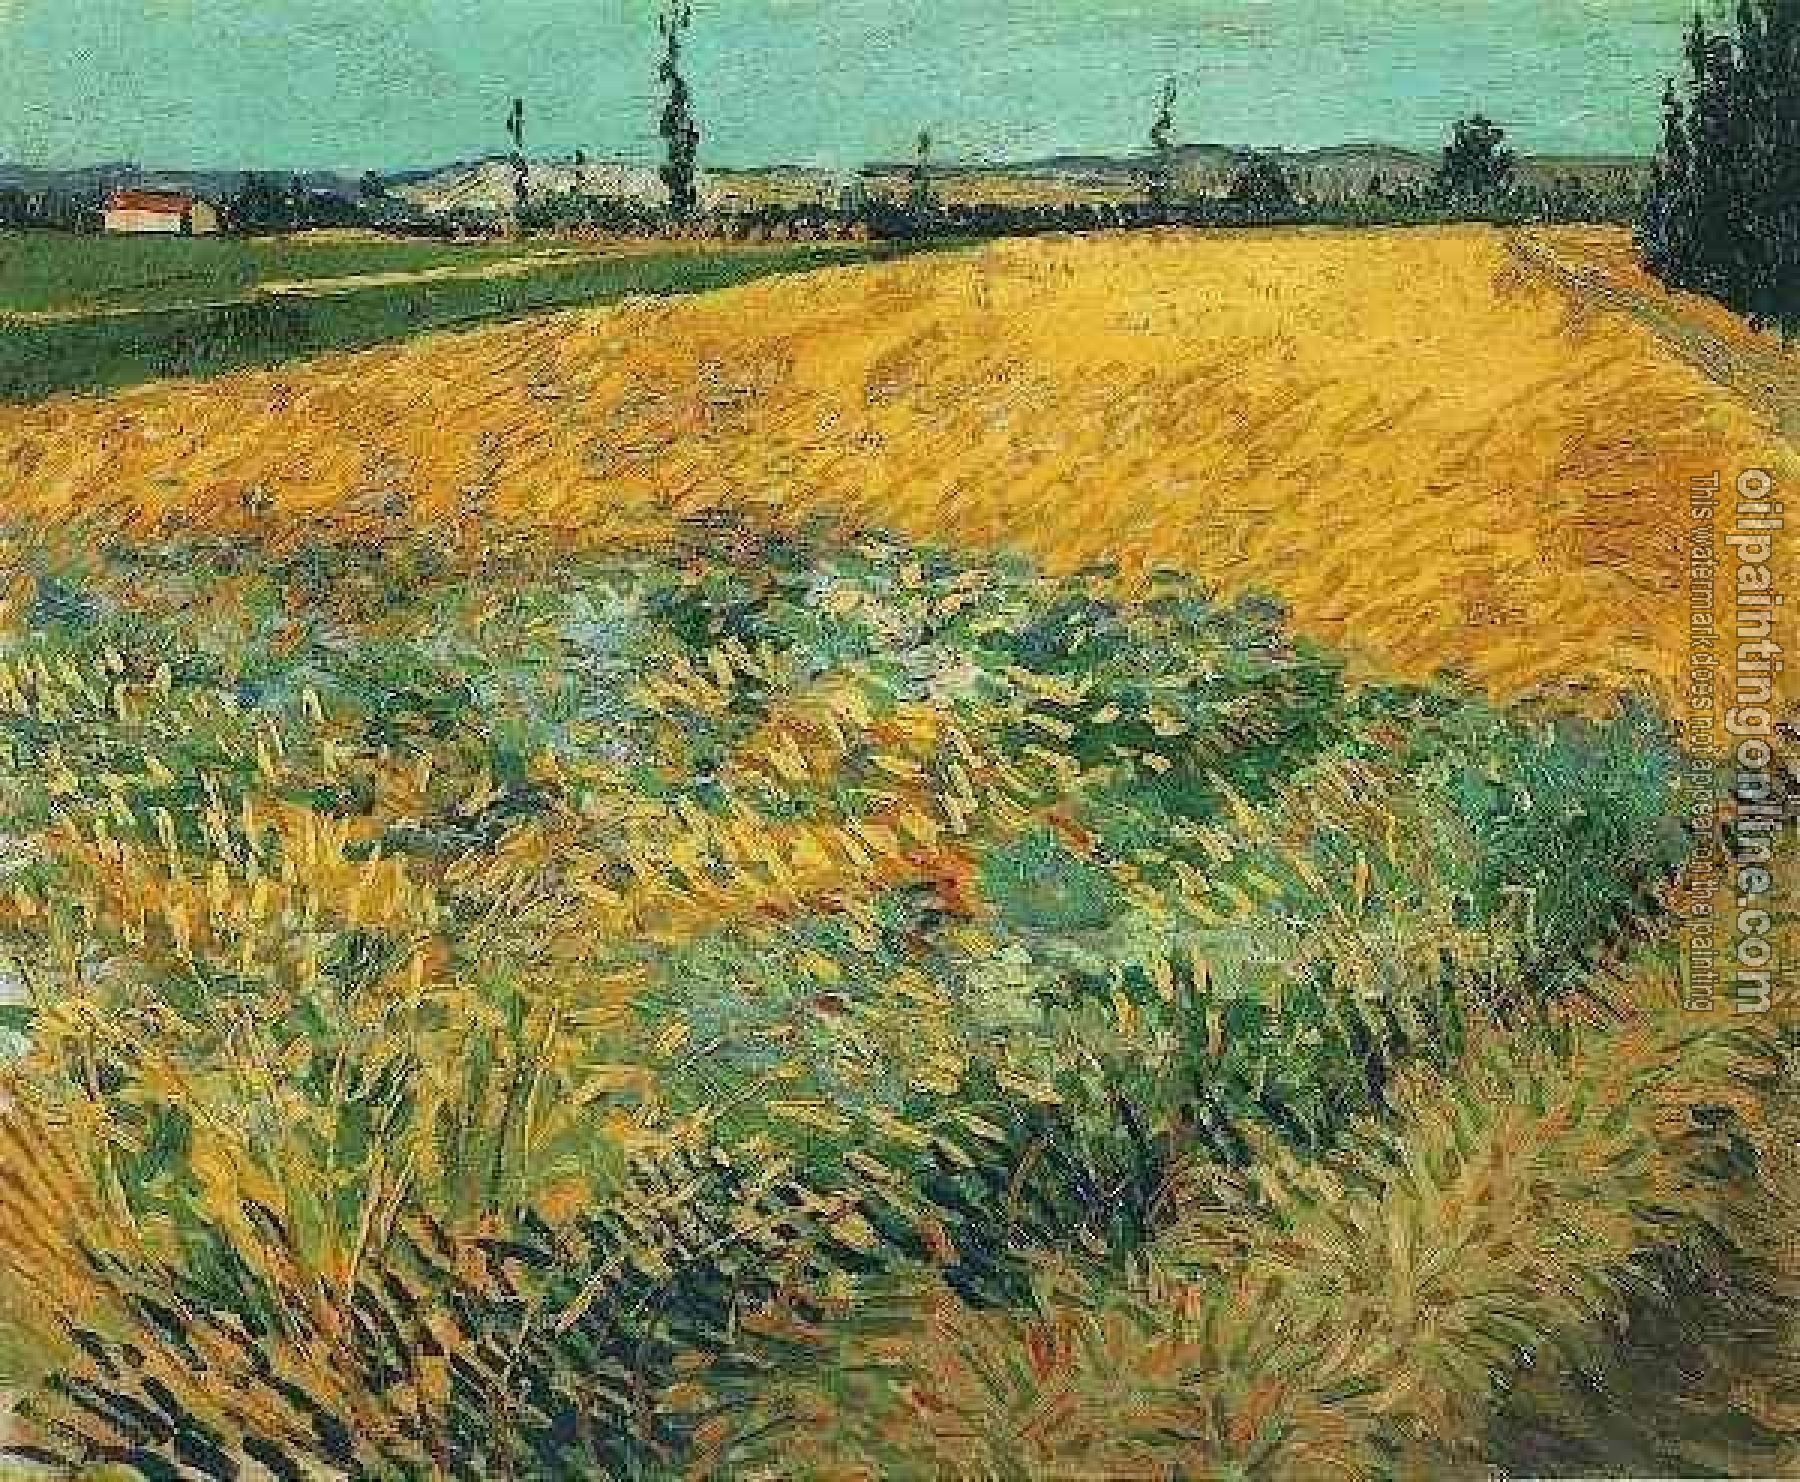 Gogh, Vincent van - Wheat Field with the Alpilles Foothills in the Background